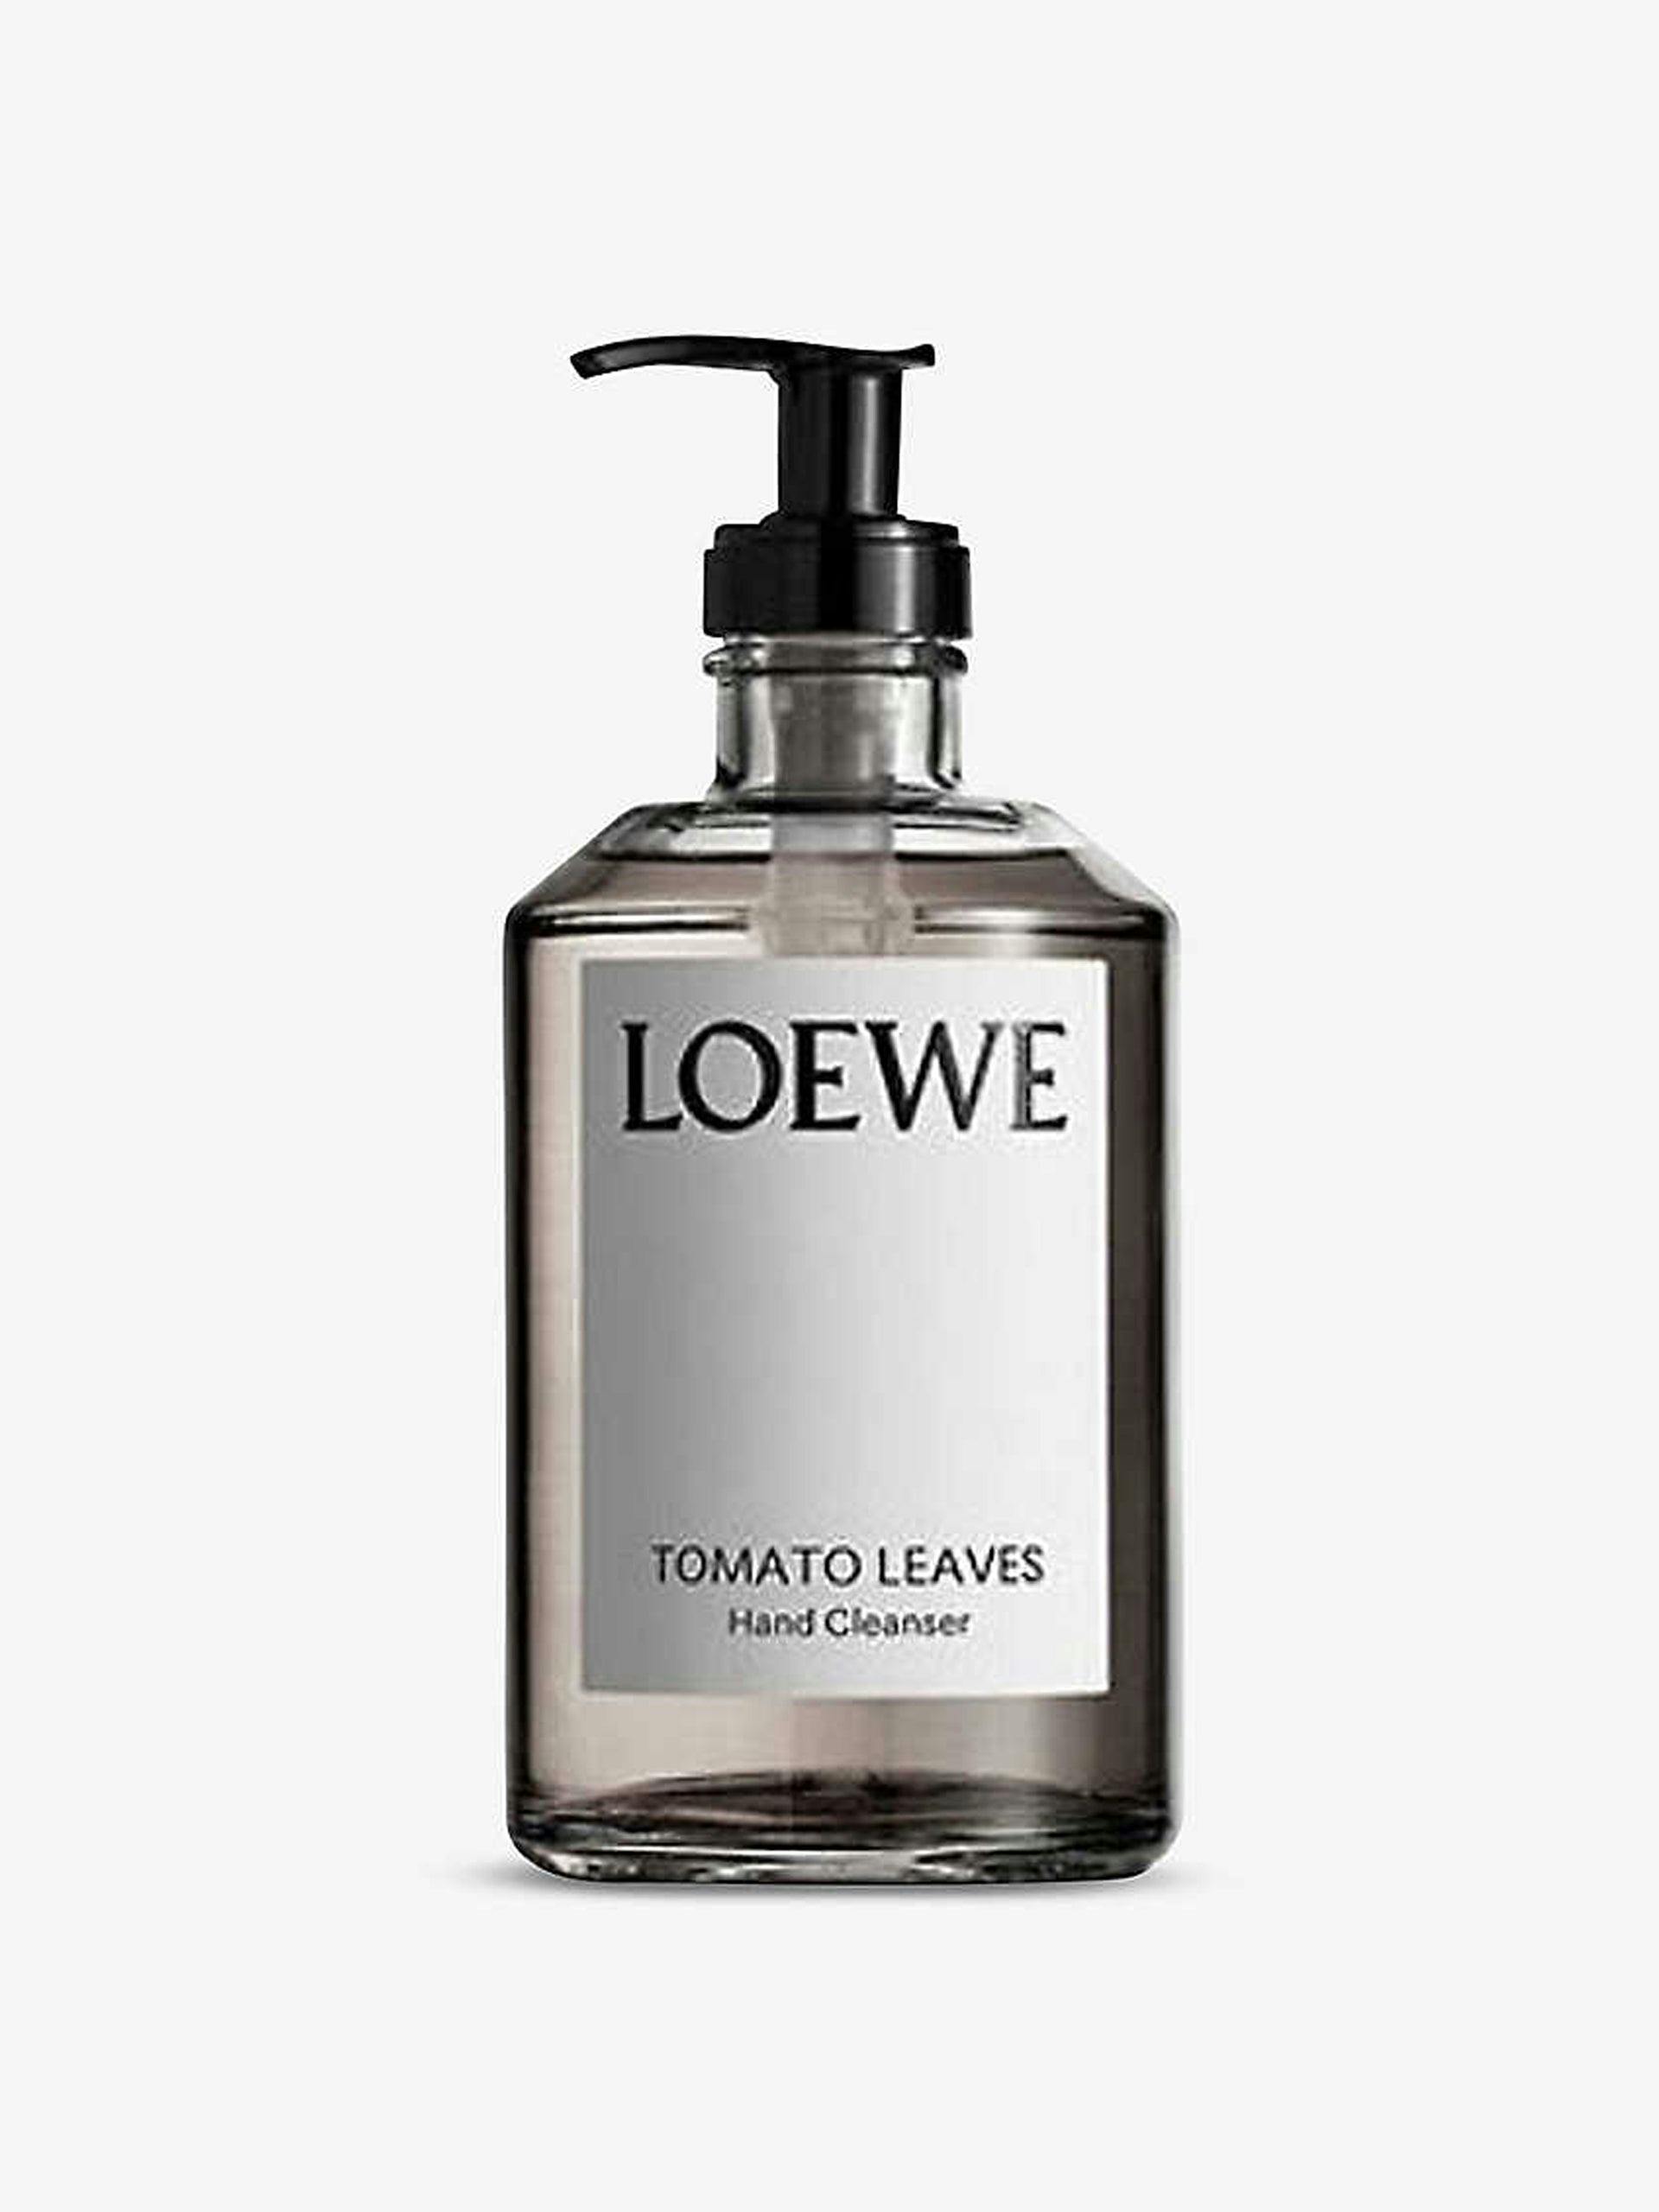 Tomato leaves scented hand cleanser